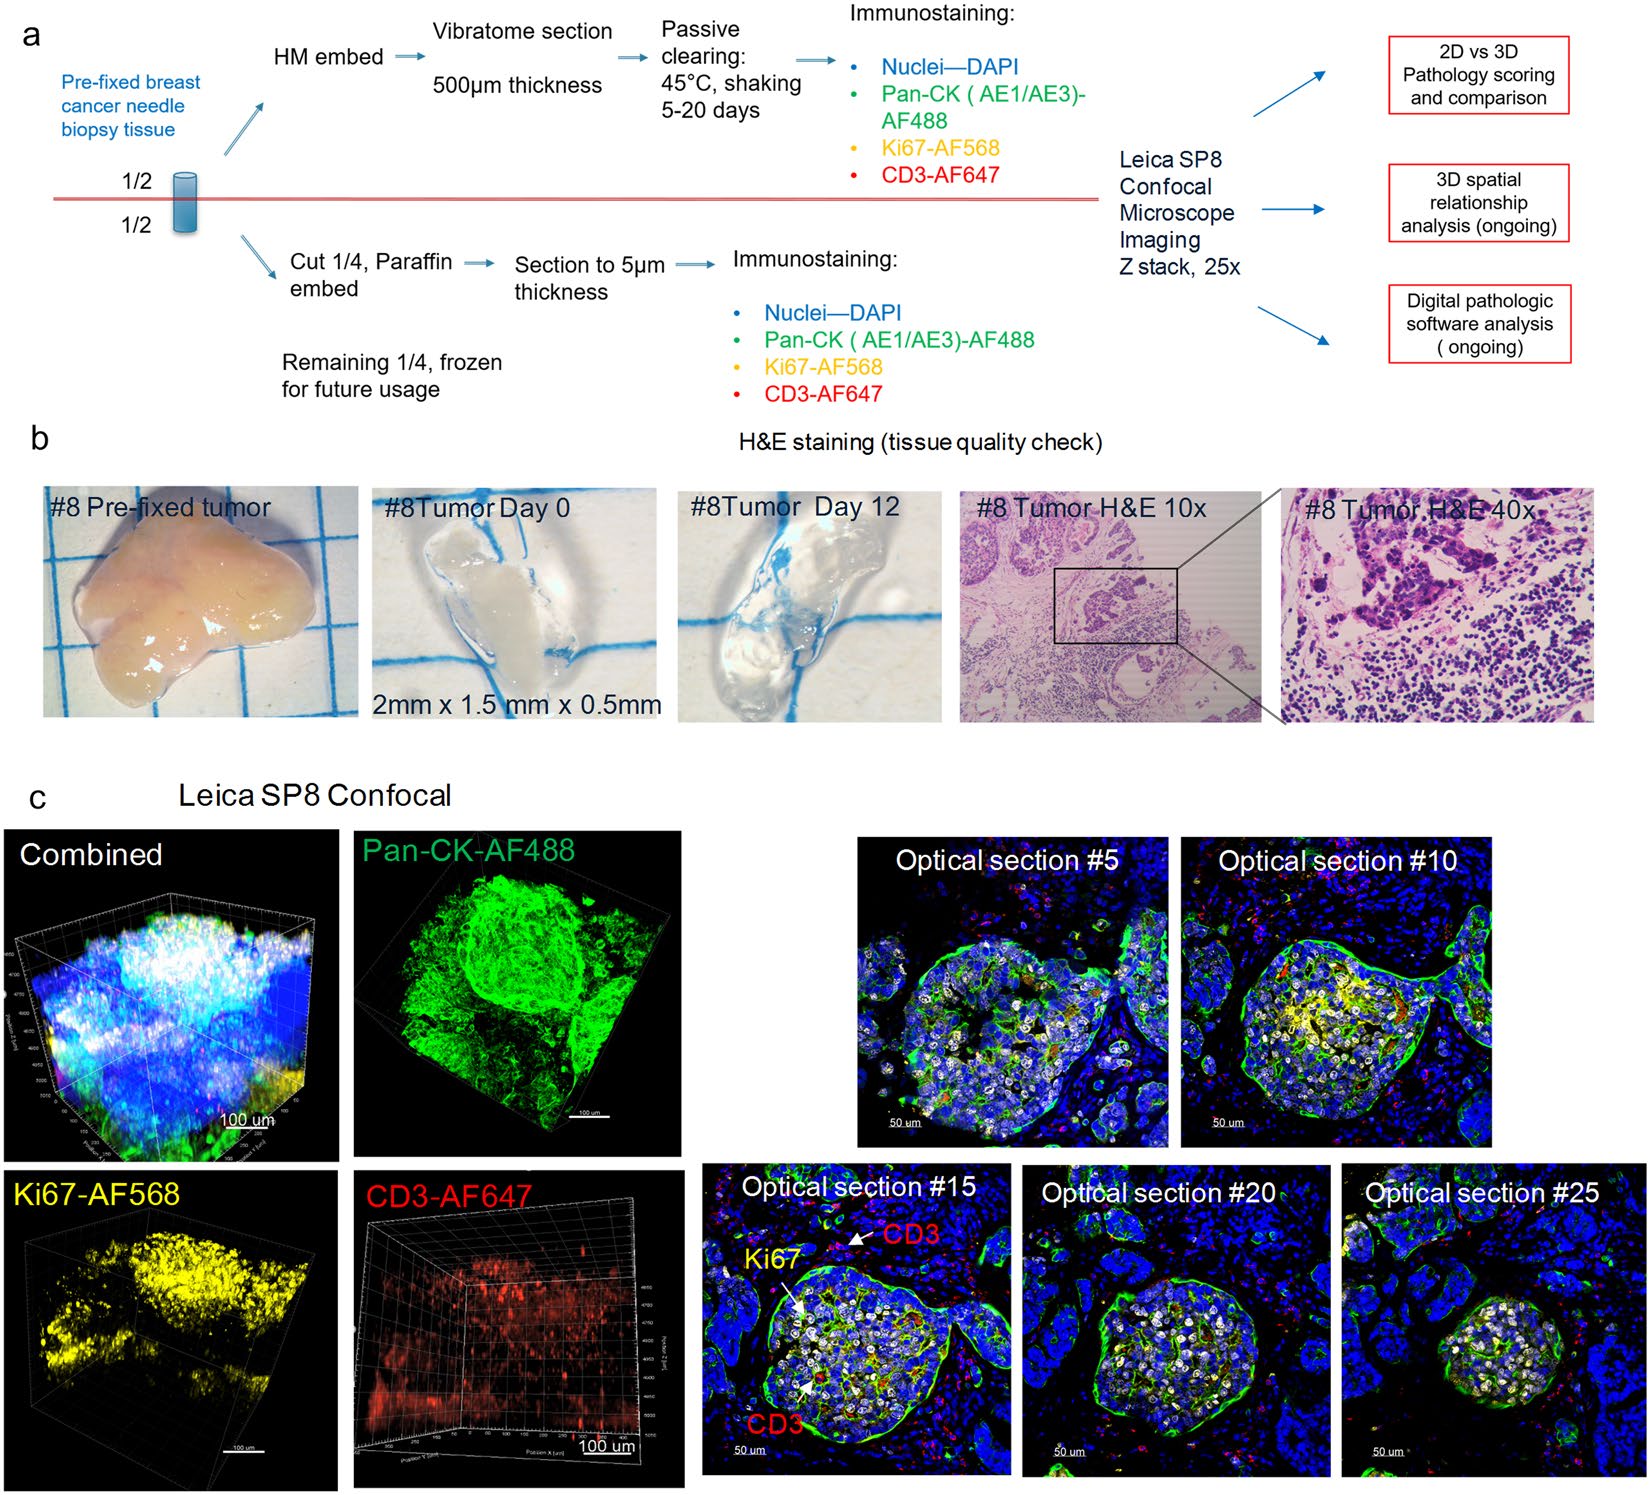 A schematic workflow diagram of CLARITY tissue processing, clearing, immunostaining, and imaging for the pre-fixed clinical biopsy samples of human breast cancer tissue